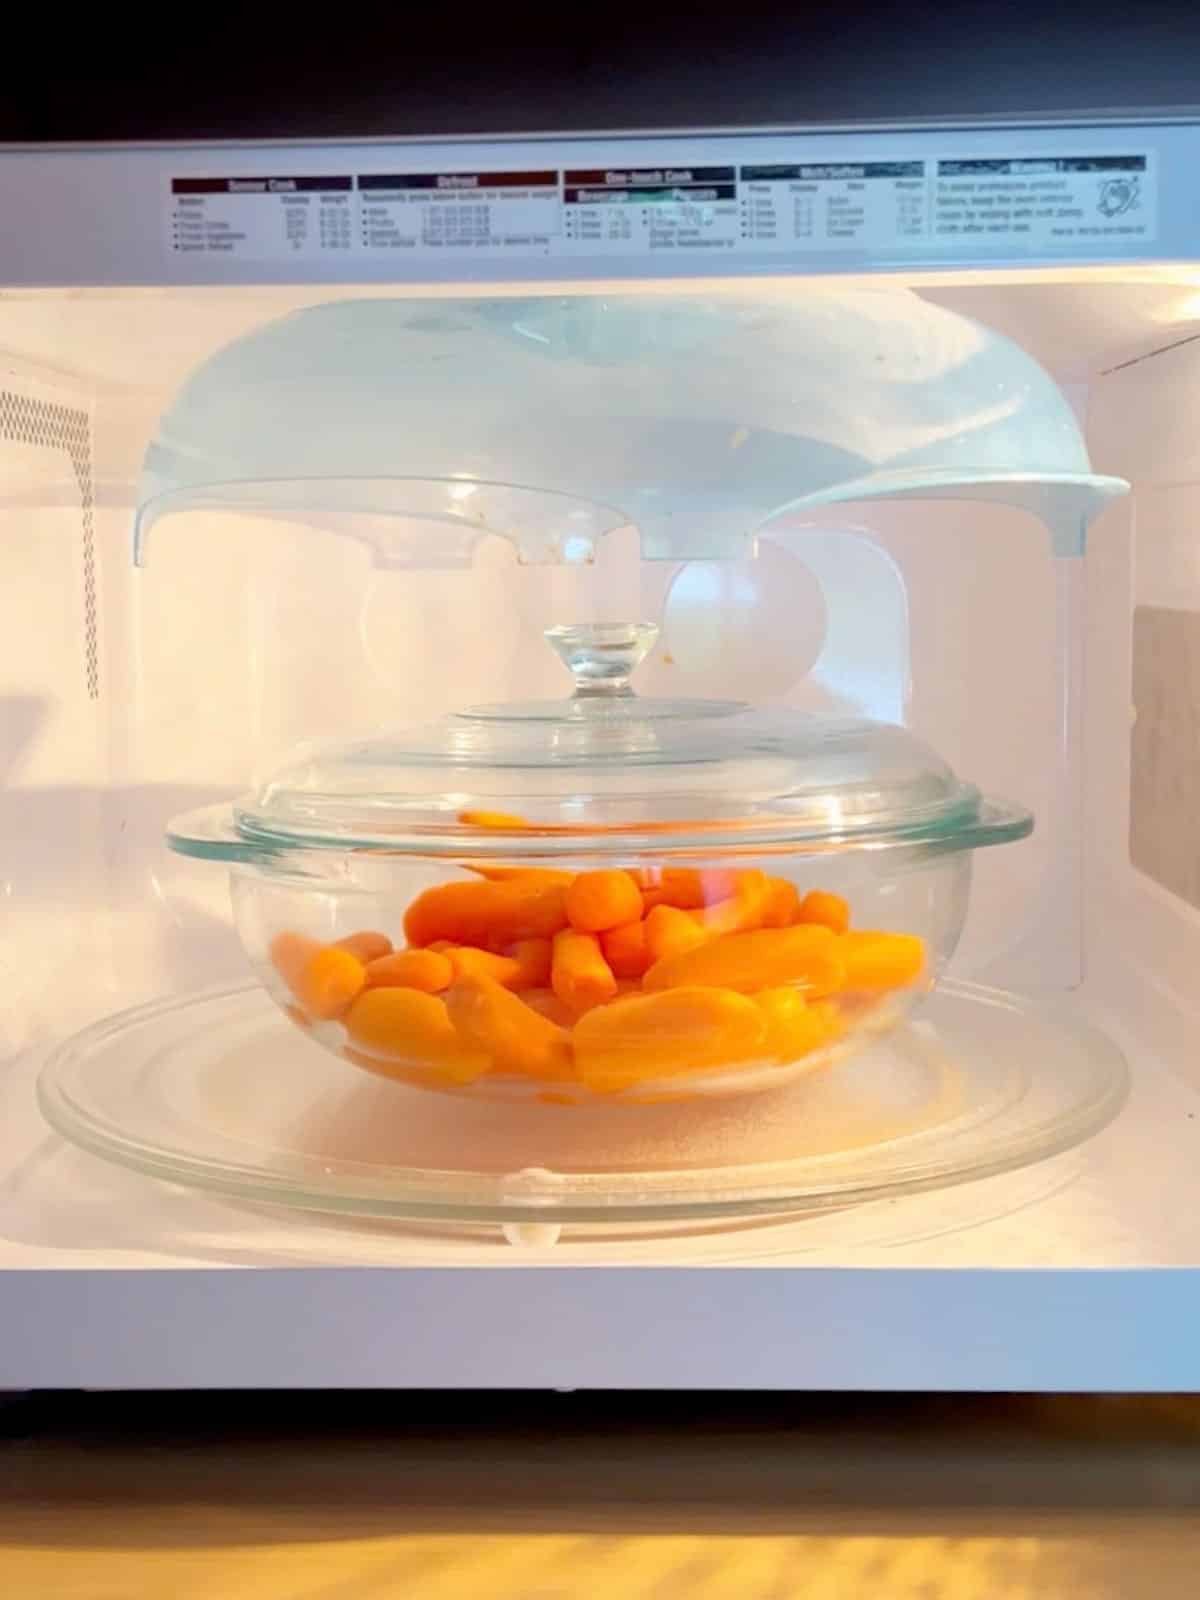 A covered bowl of carrots in a microwave.